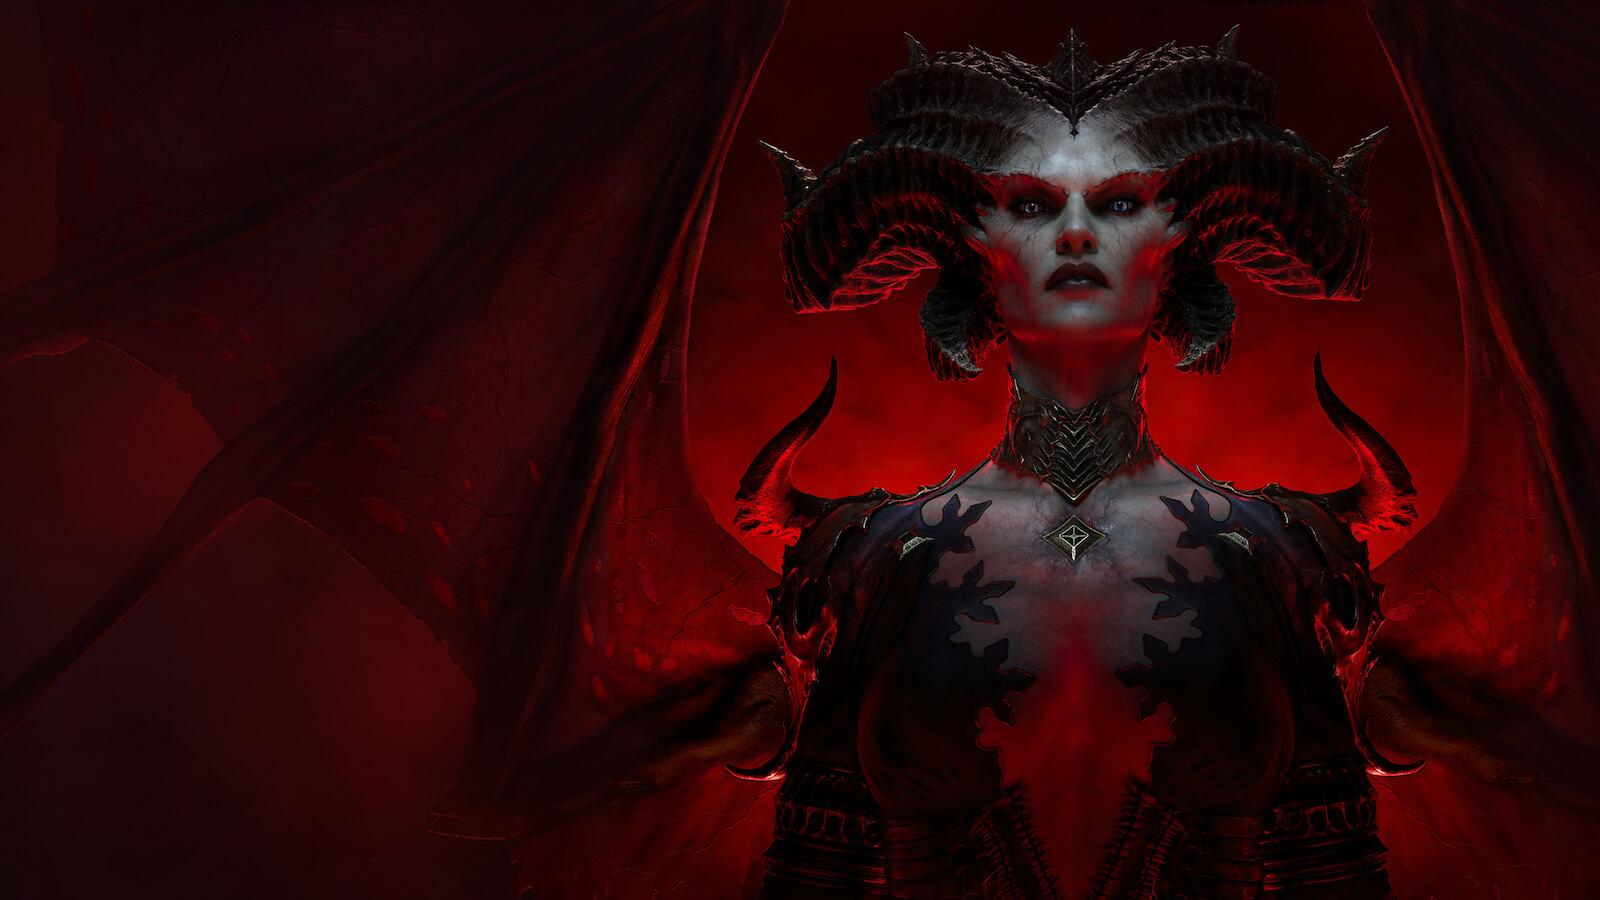 Leaked Blizzard survey could indicate that Diablo 4 will get DLC costing $100